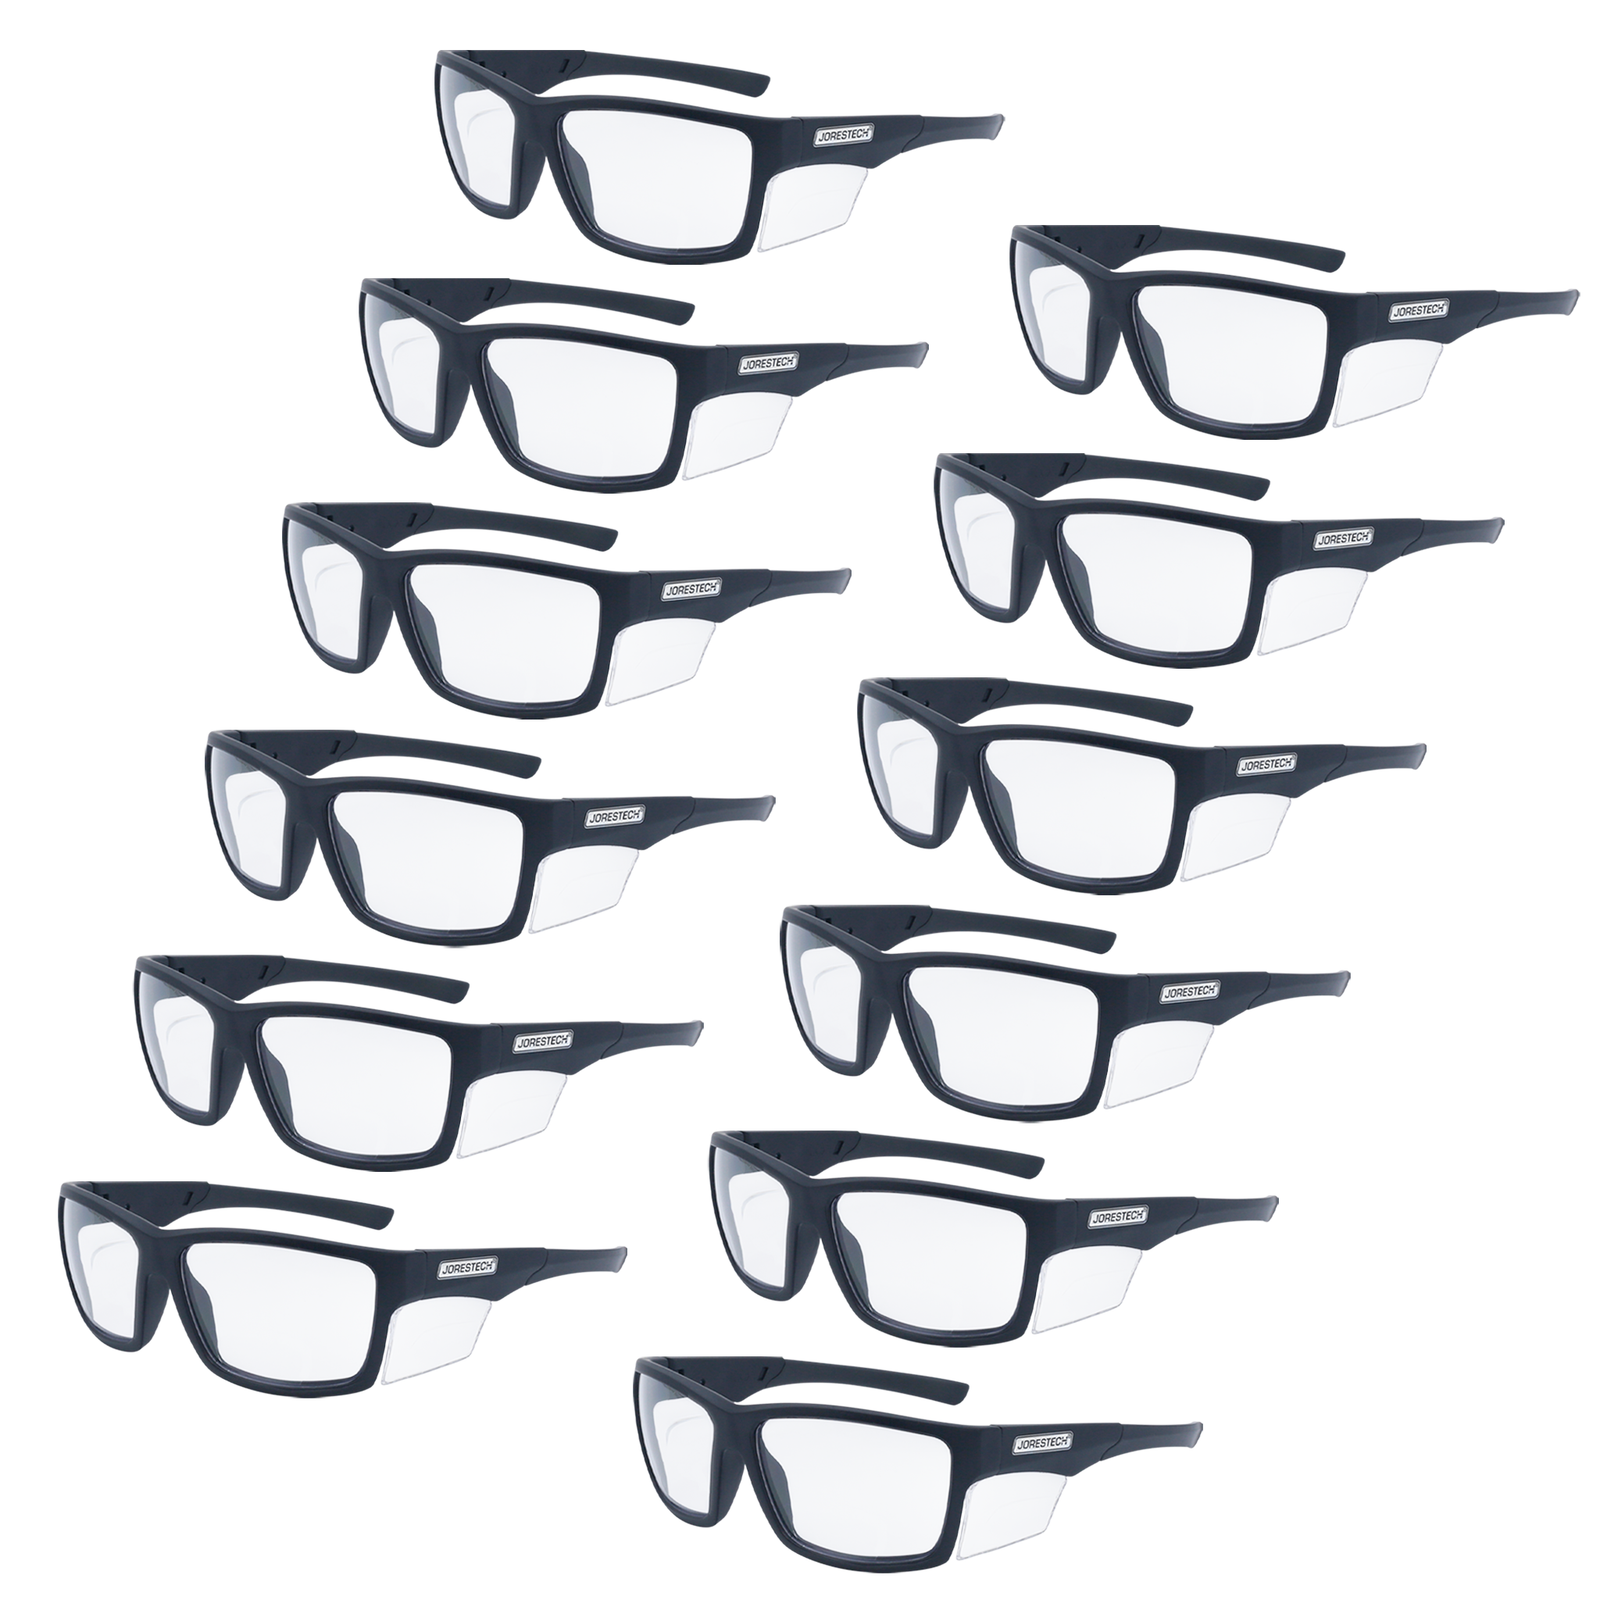 Image shows a diagonal view of a JORESTECH safety clear Glass with transparent side shield for high impact protection. These safety glasses are ANSI compliant and have black frame and clear polycarbonate lenses. The background of the image is white